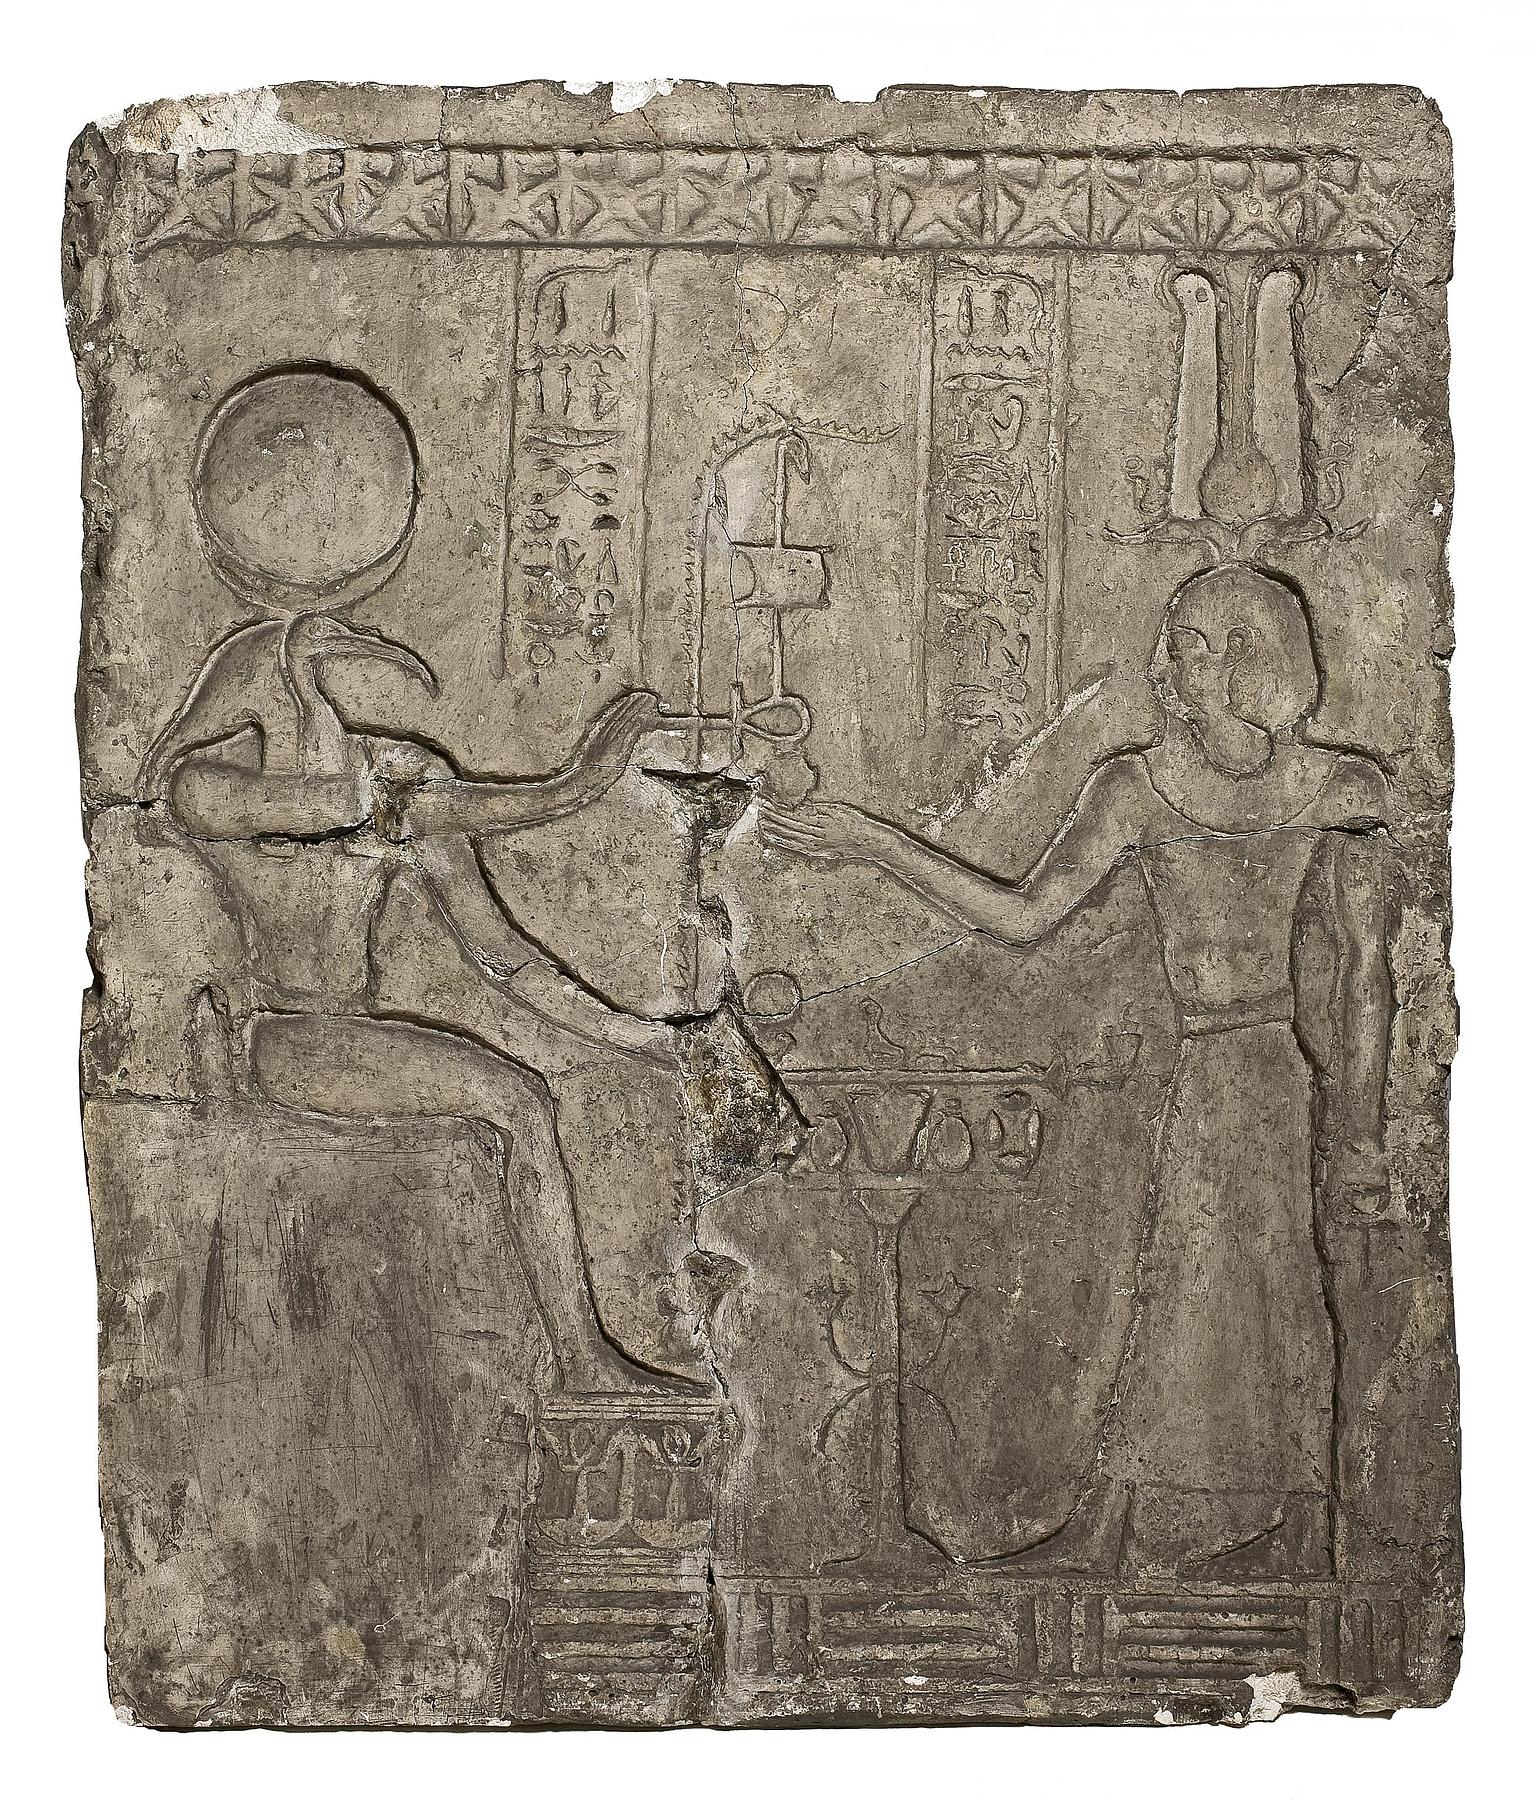 Antinous receives a wadjet from Amon, L223